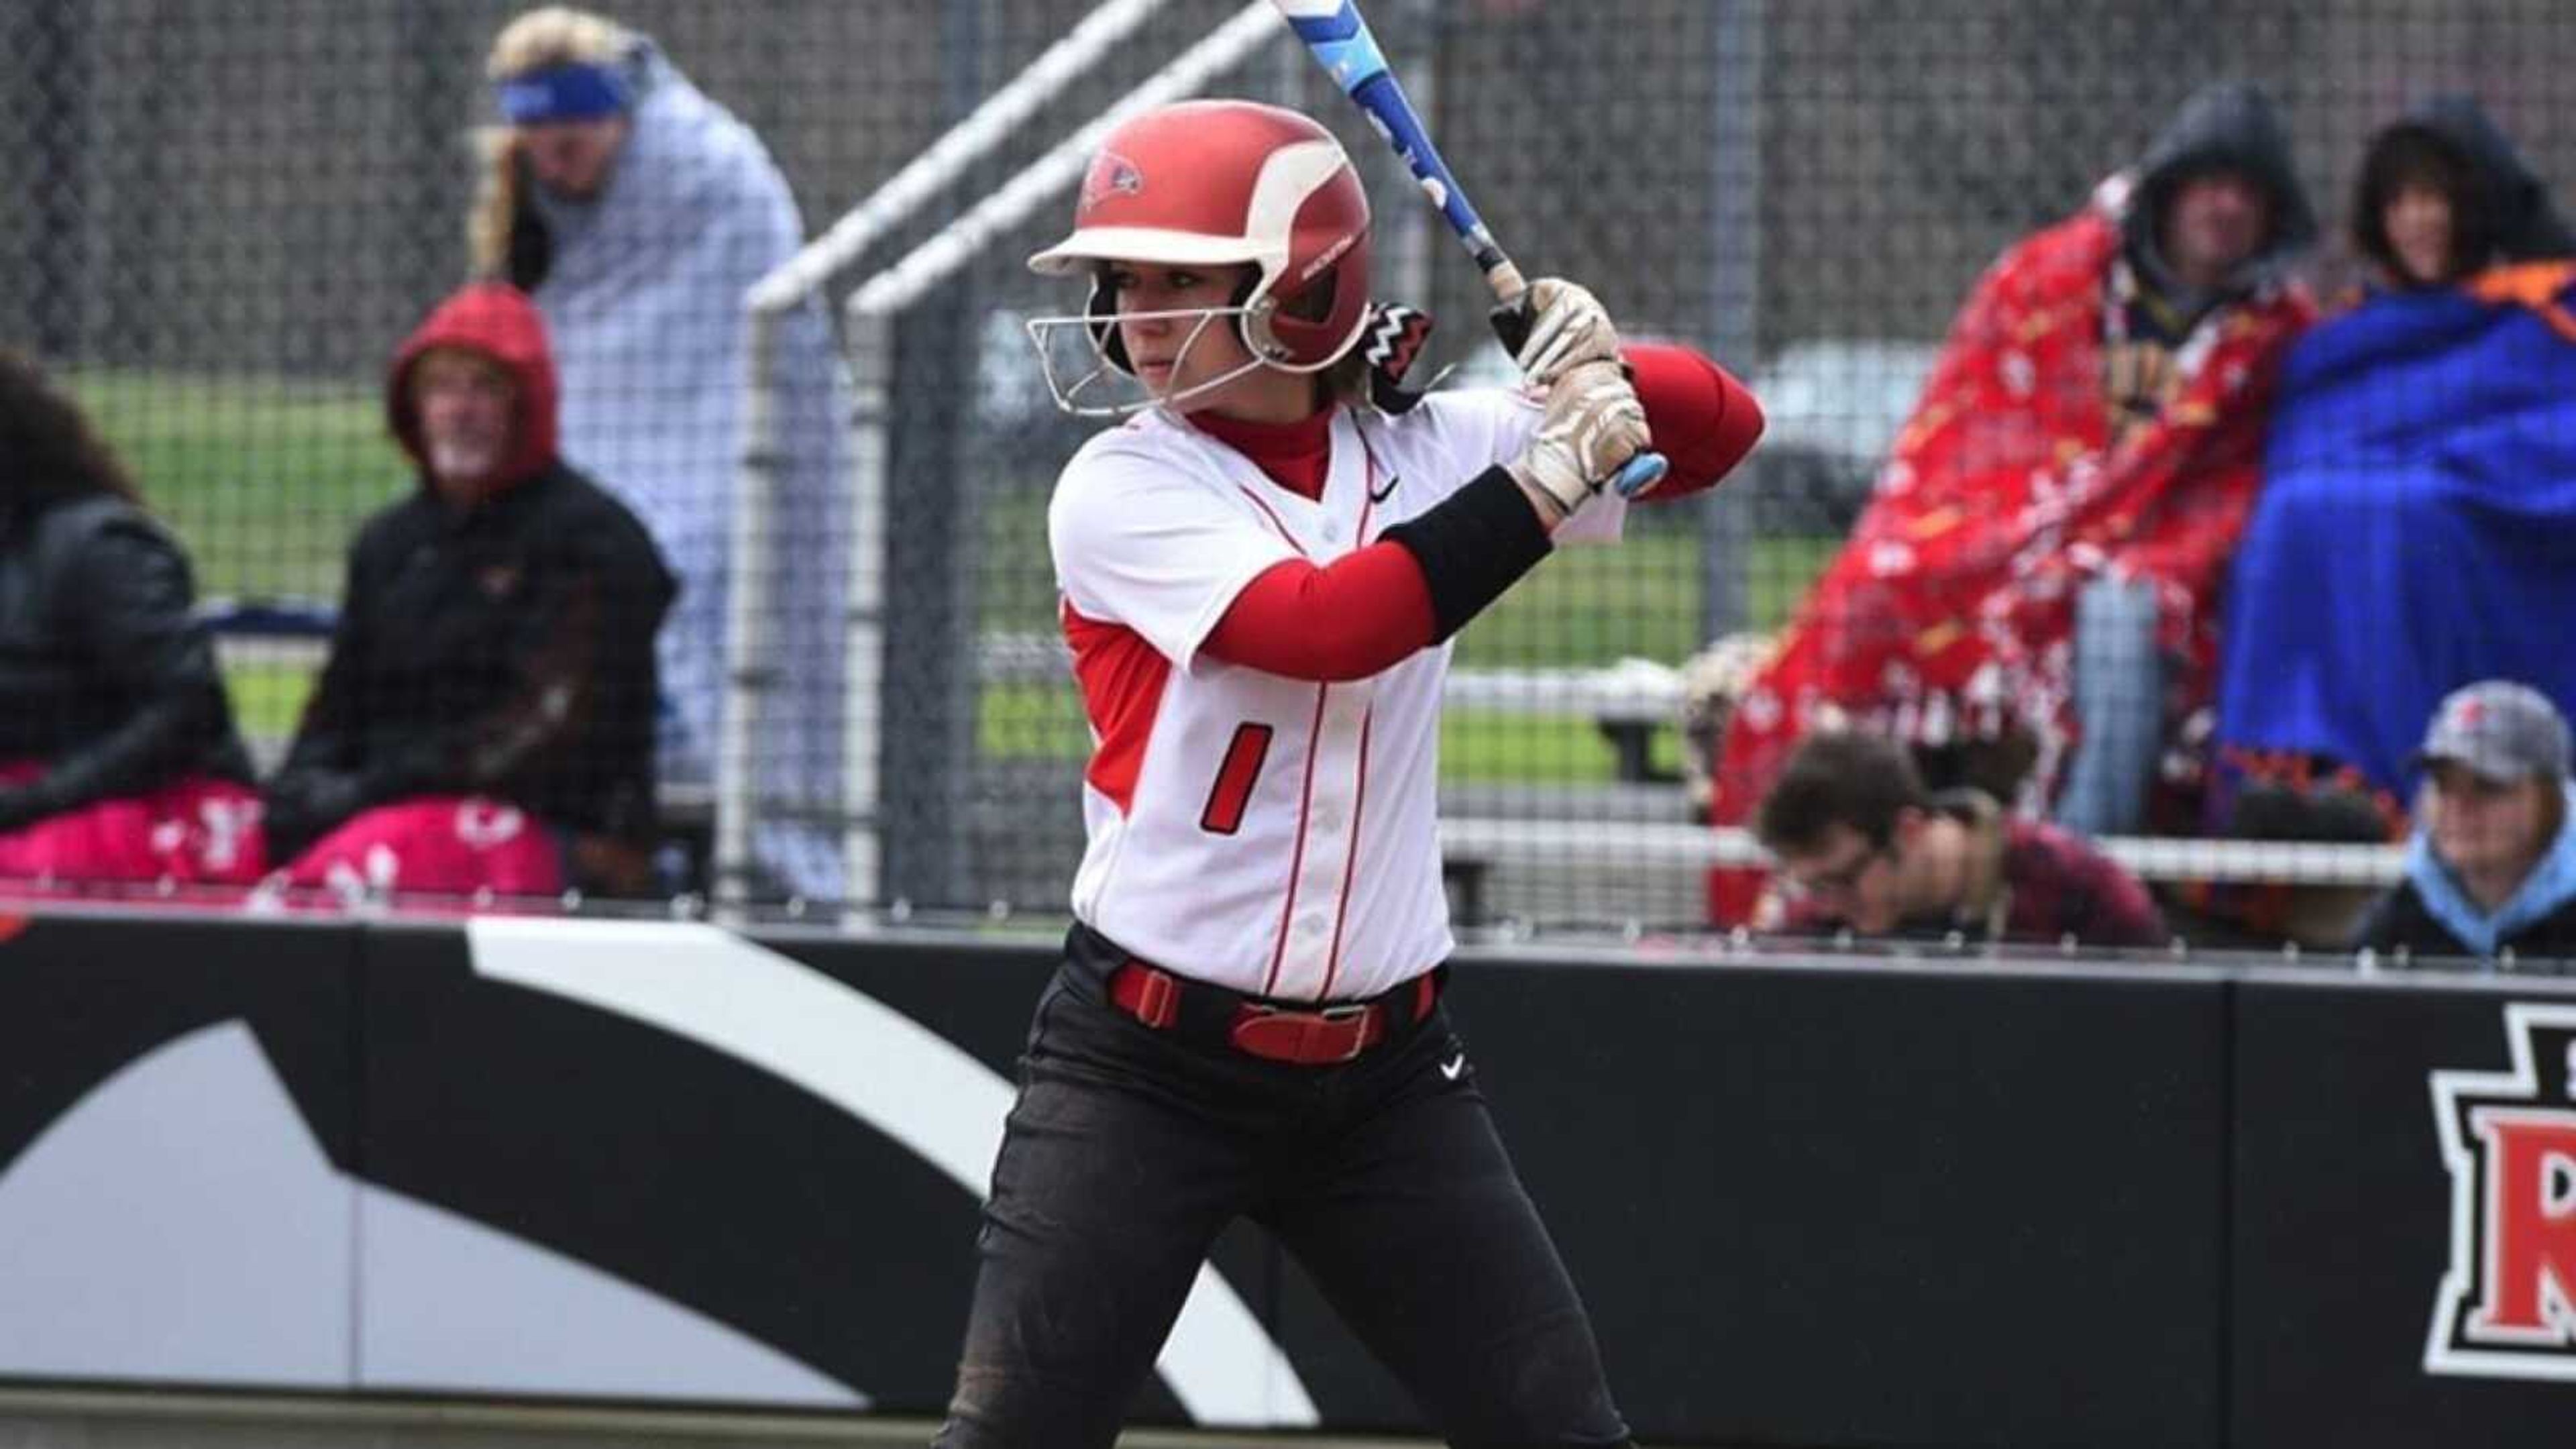 Outfielder Claire Wernig prepares to hit in the on-deck circle.